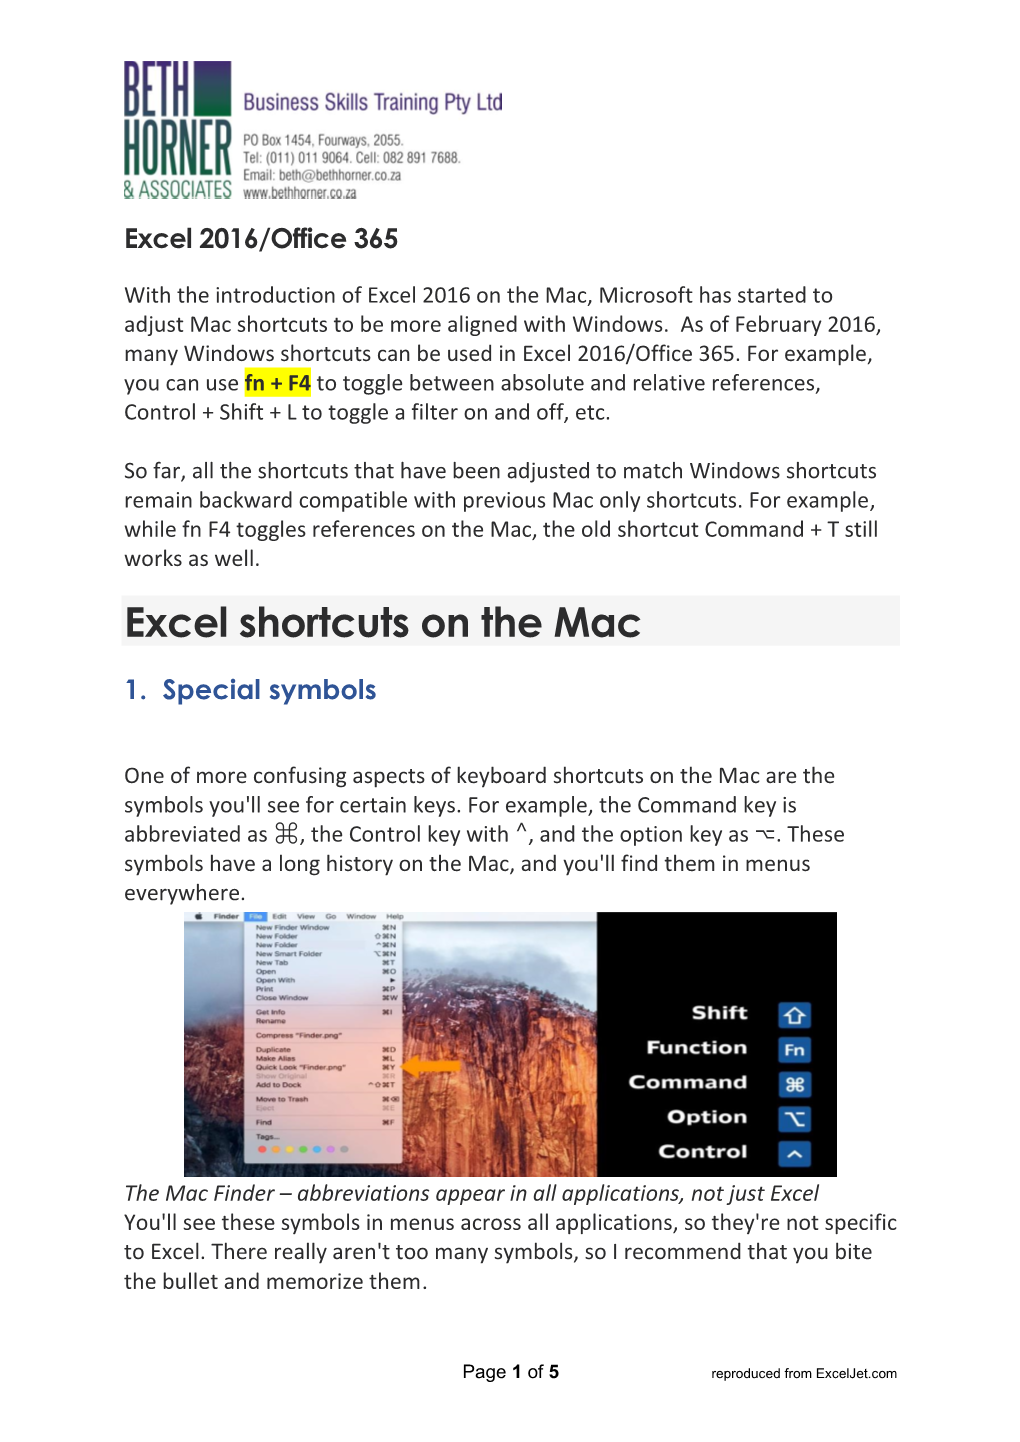 Excel Shortcuts on the Mac